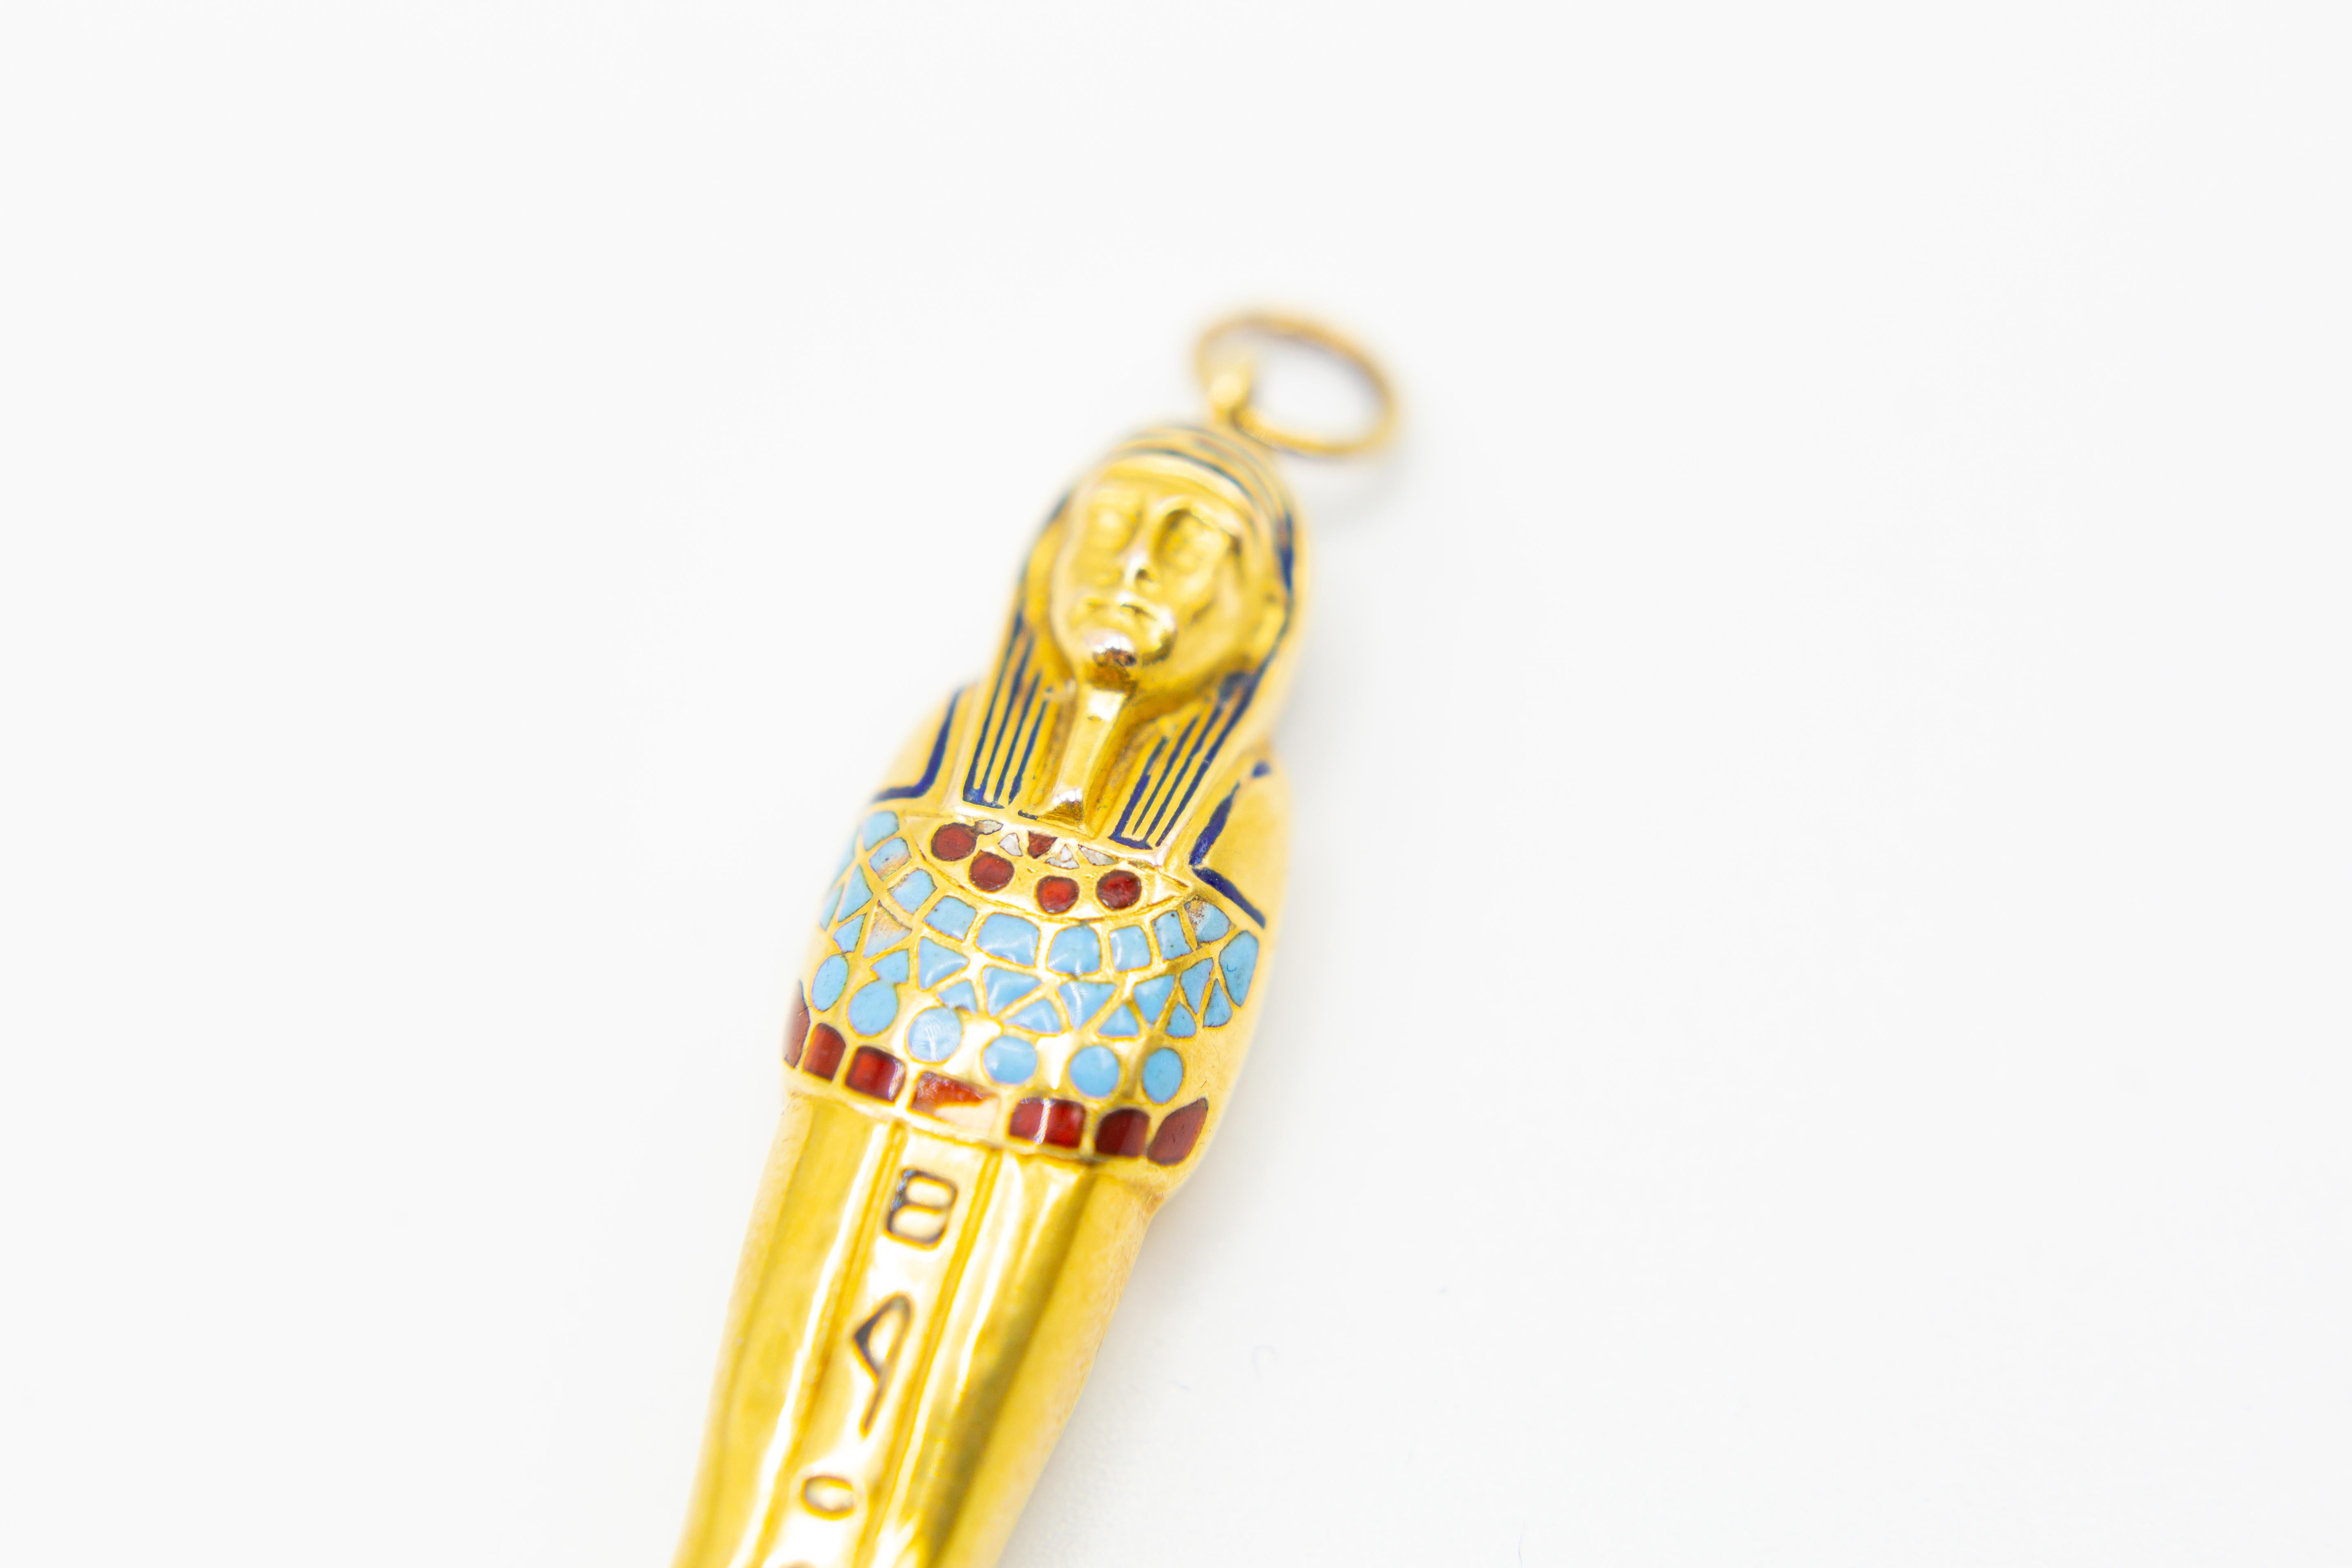 Antique 14k gold and enameled propelling pencil Egyptian mummy from the 20th century. The pencil is 7.2cm long. It has a bit of enamel loss. It weighs 15.04g